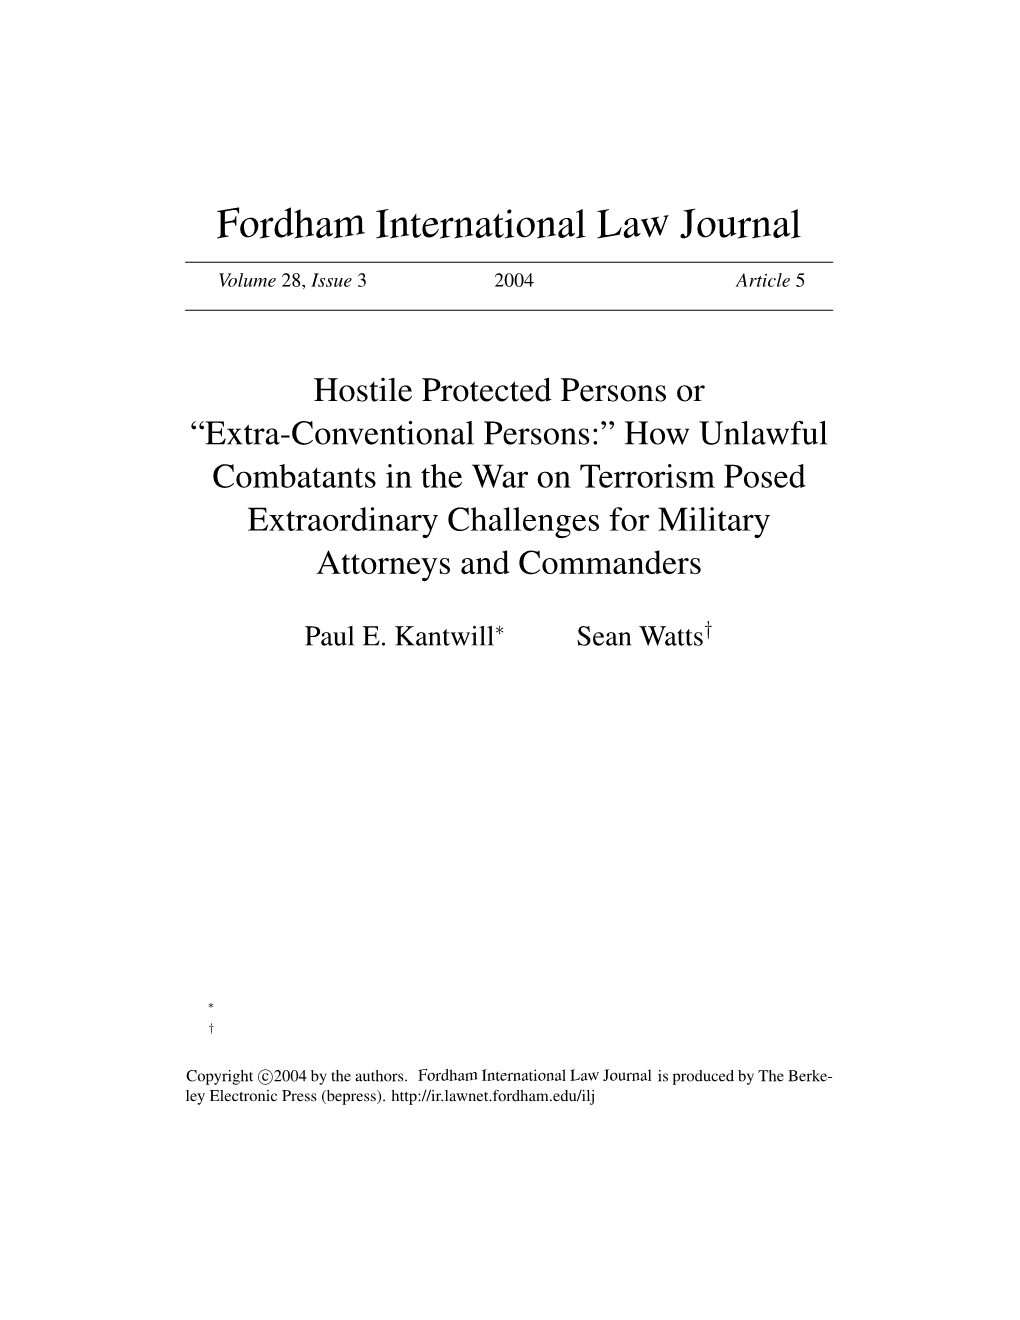 How Unlawful Combatants in the War on Terrorism Posed Extraordinary Challenges for Military Attorneys and Commanders